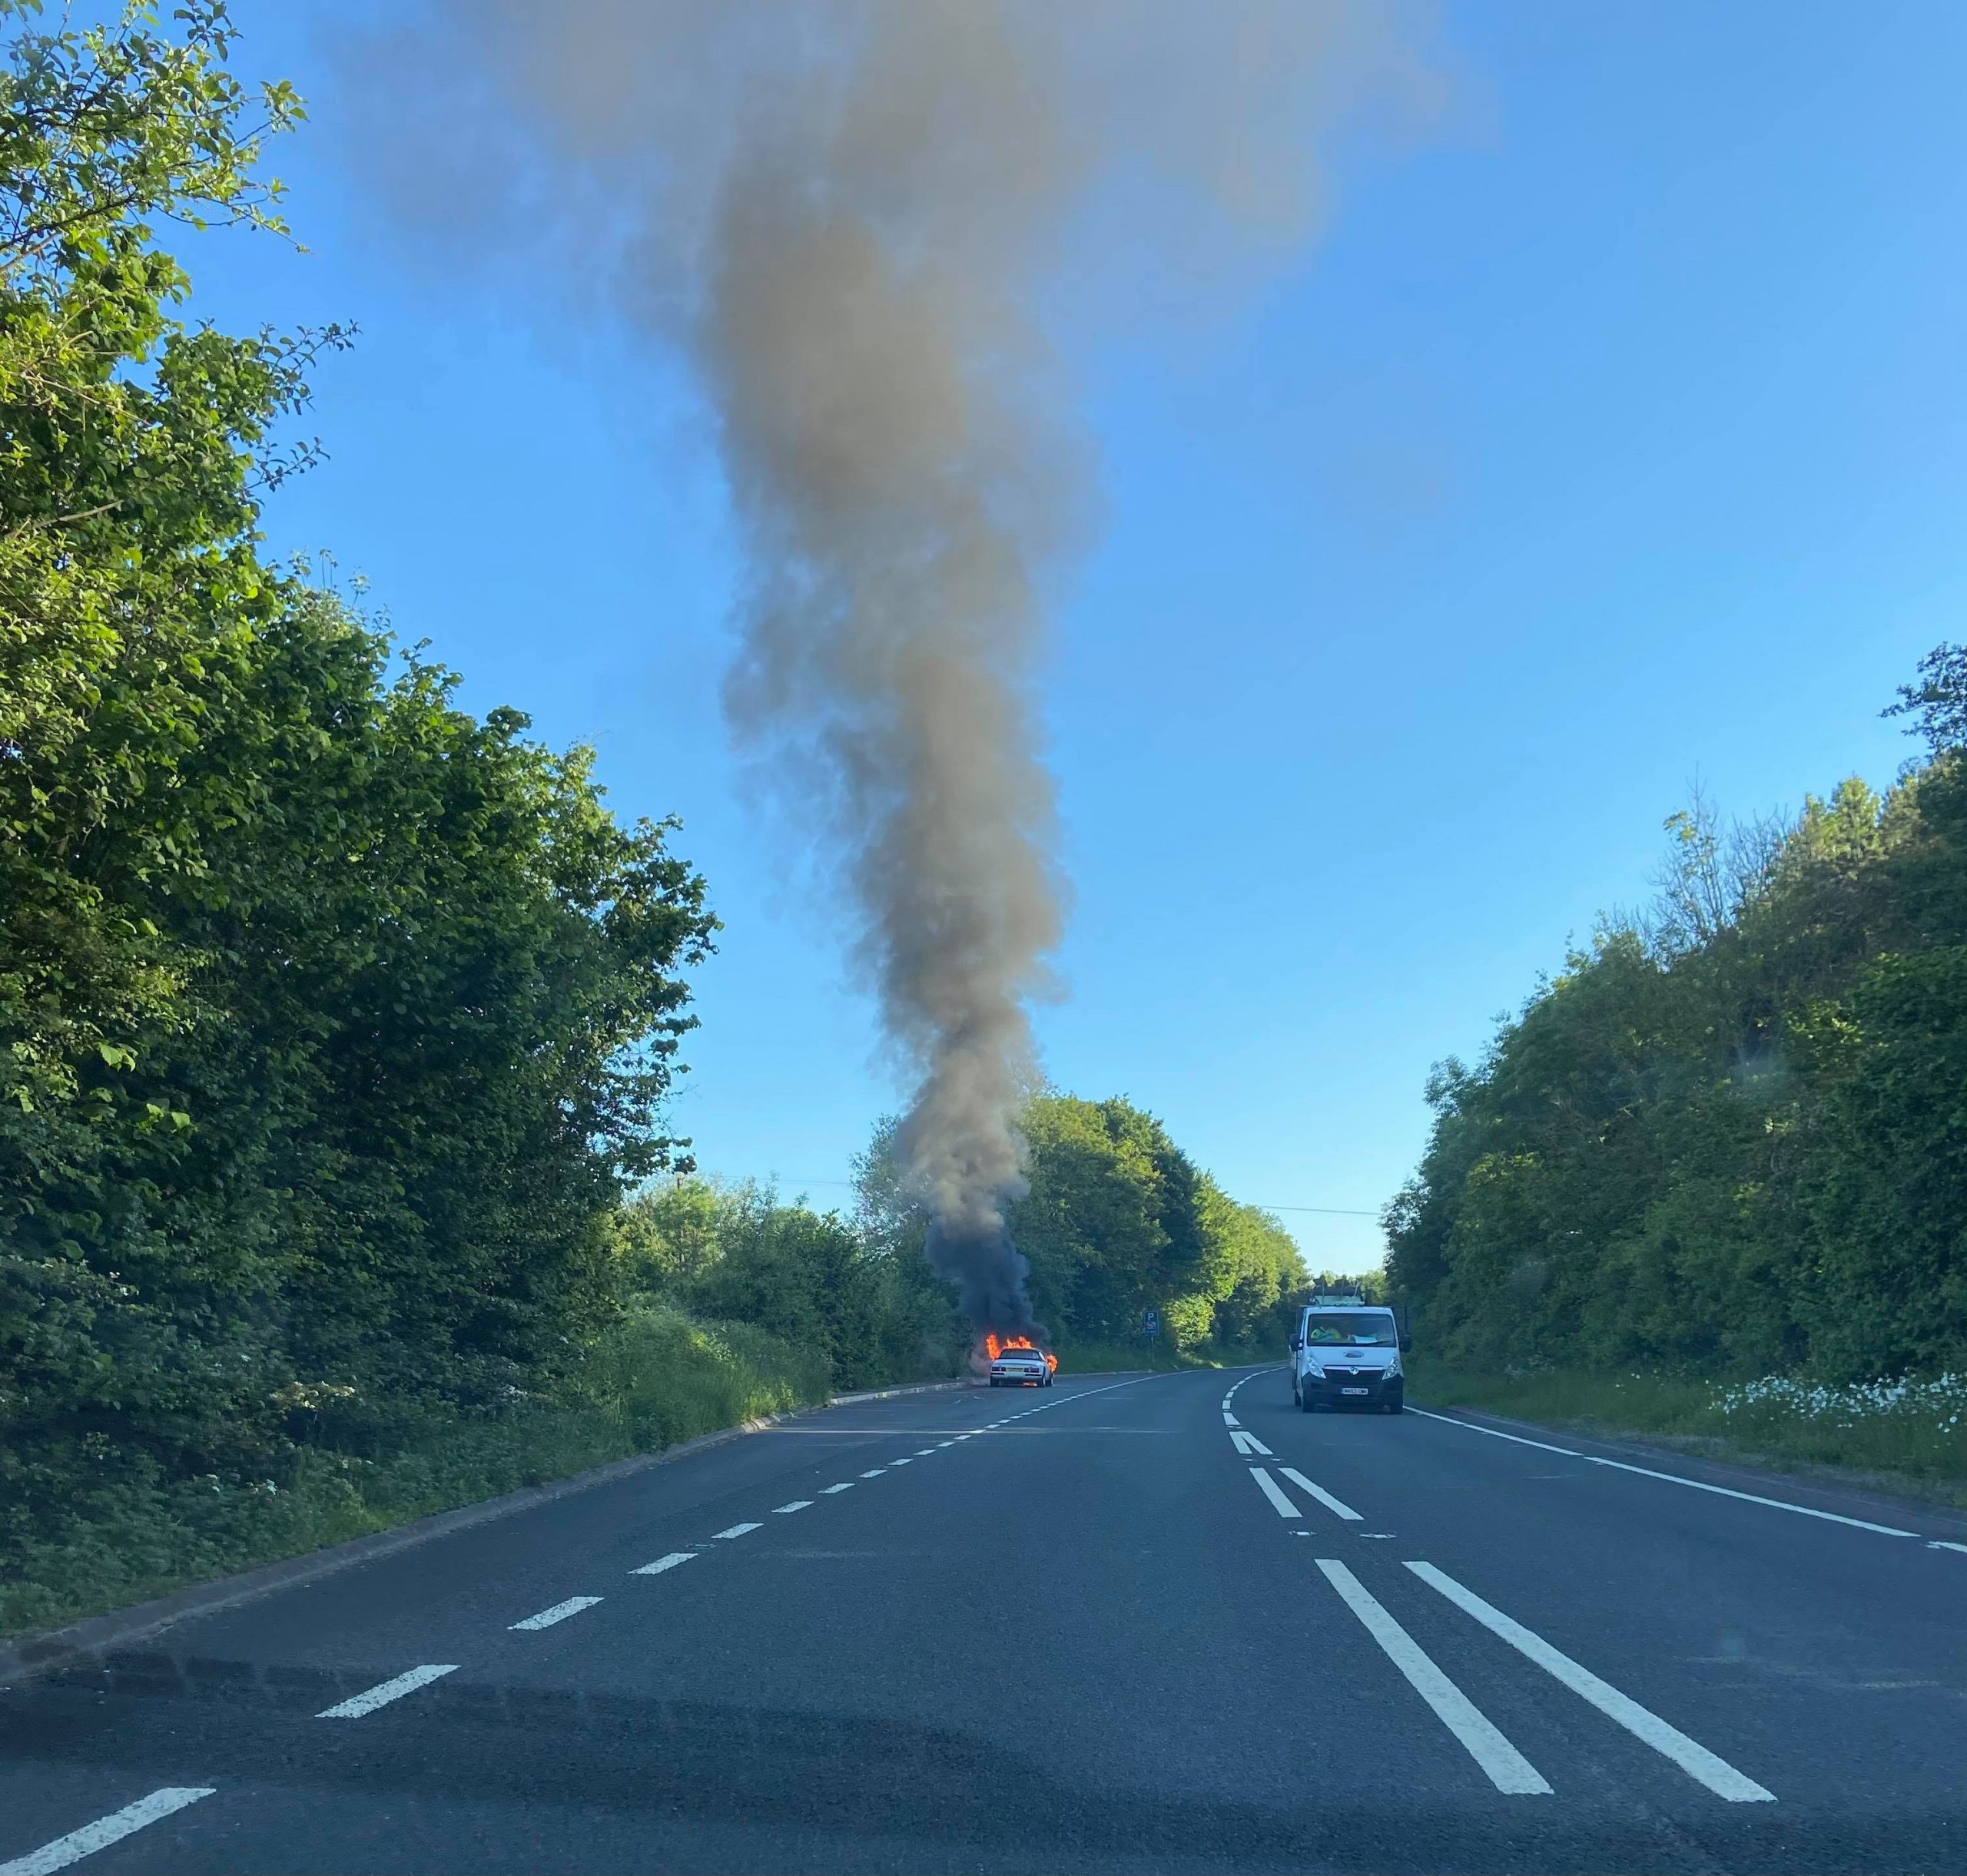 NEWS | Emergency services called to car fire in Herefordshire